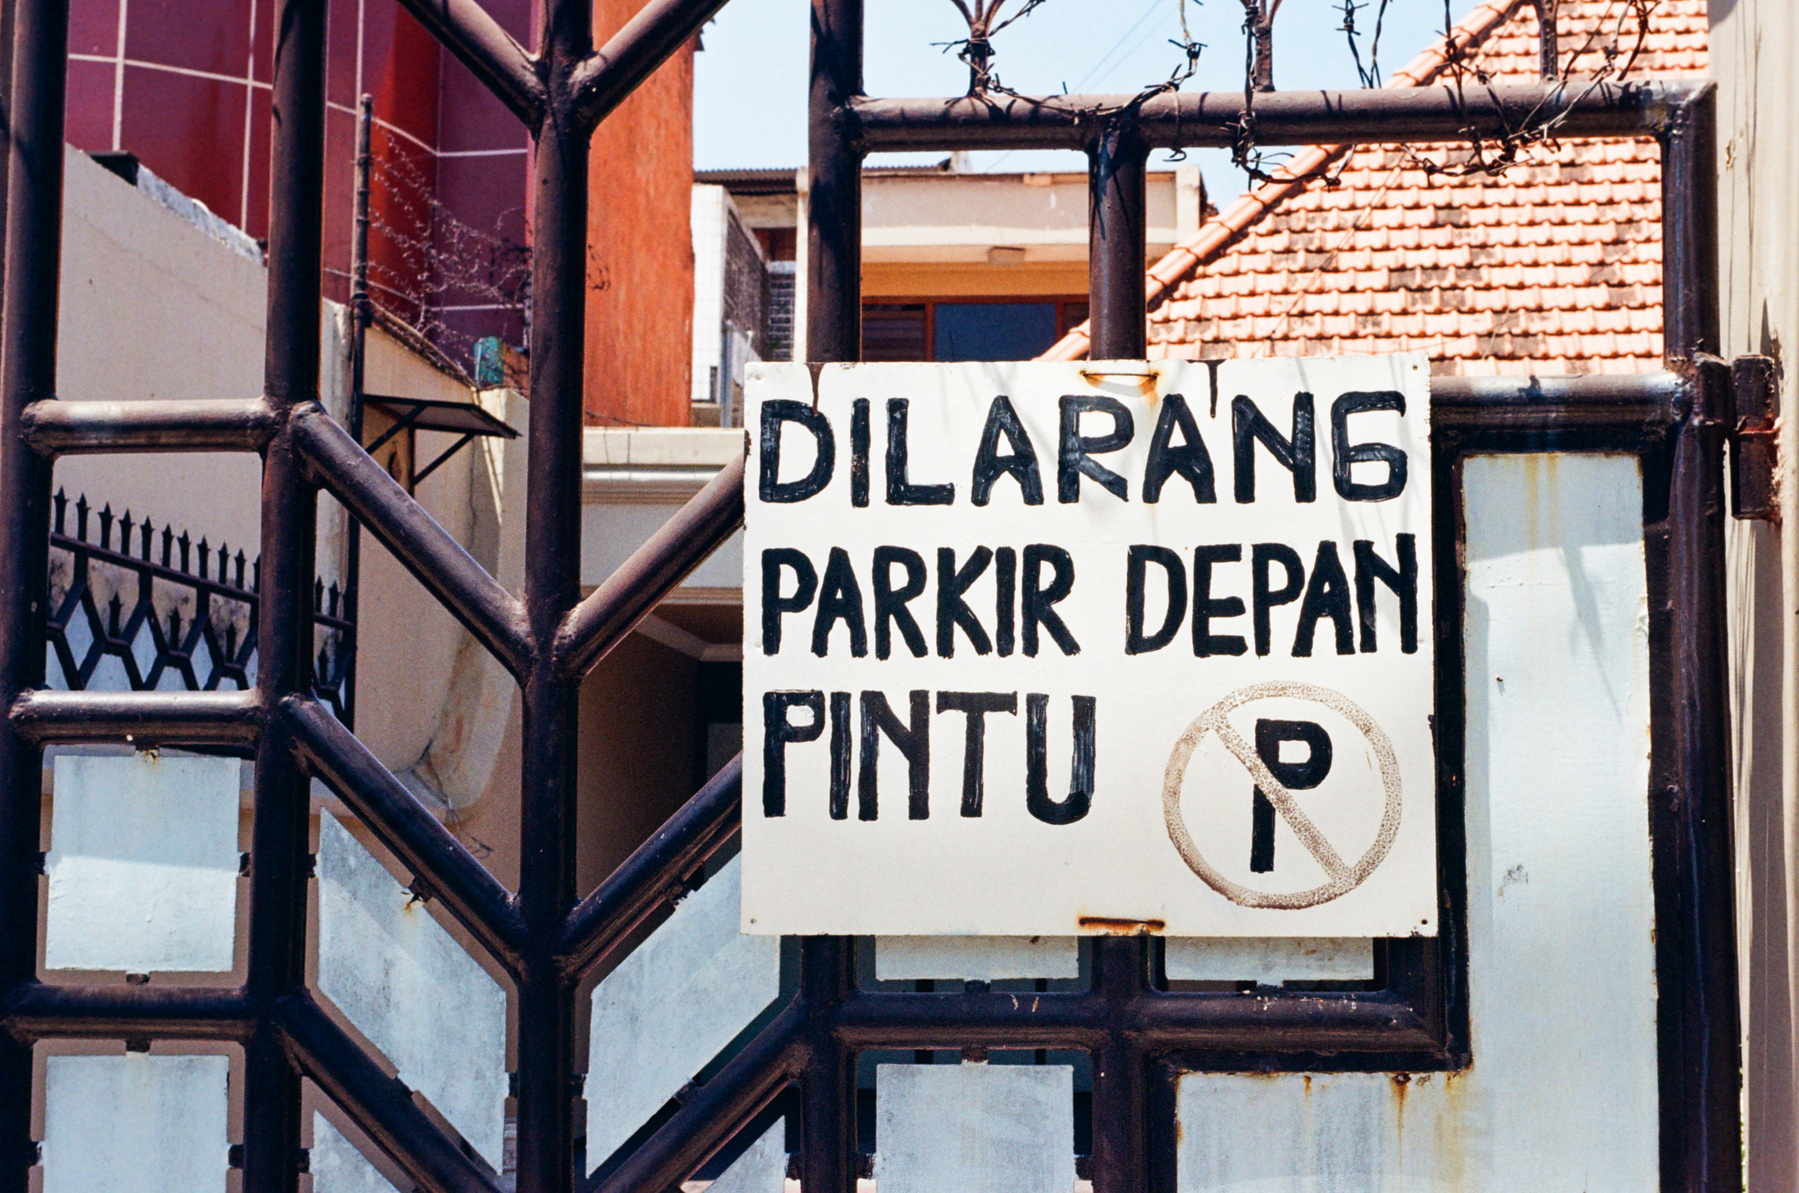 a scan of a color photo showing a no parking sign written in the Indonesian language